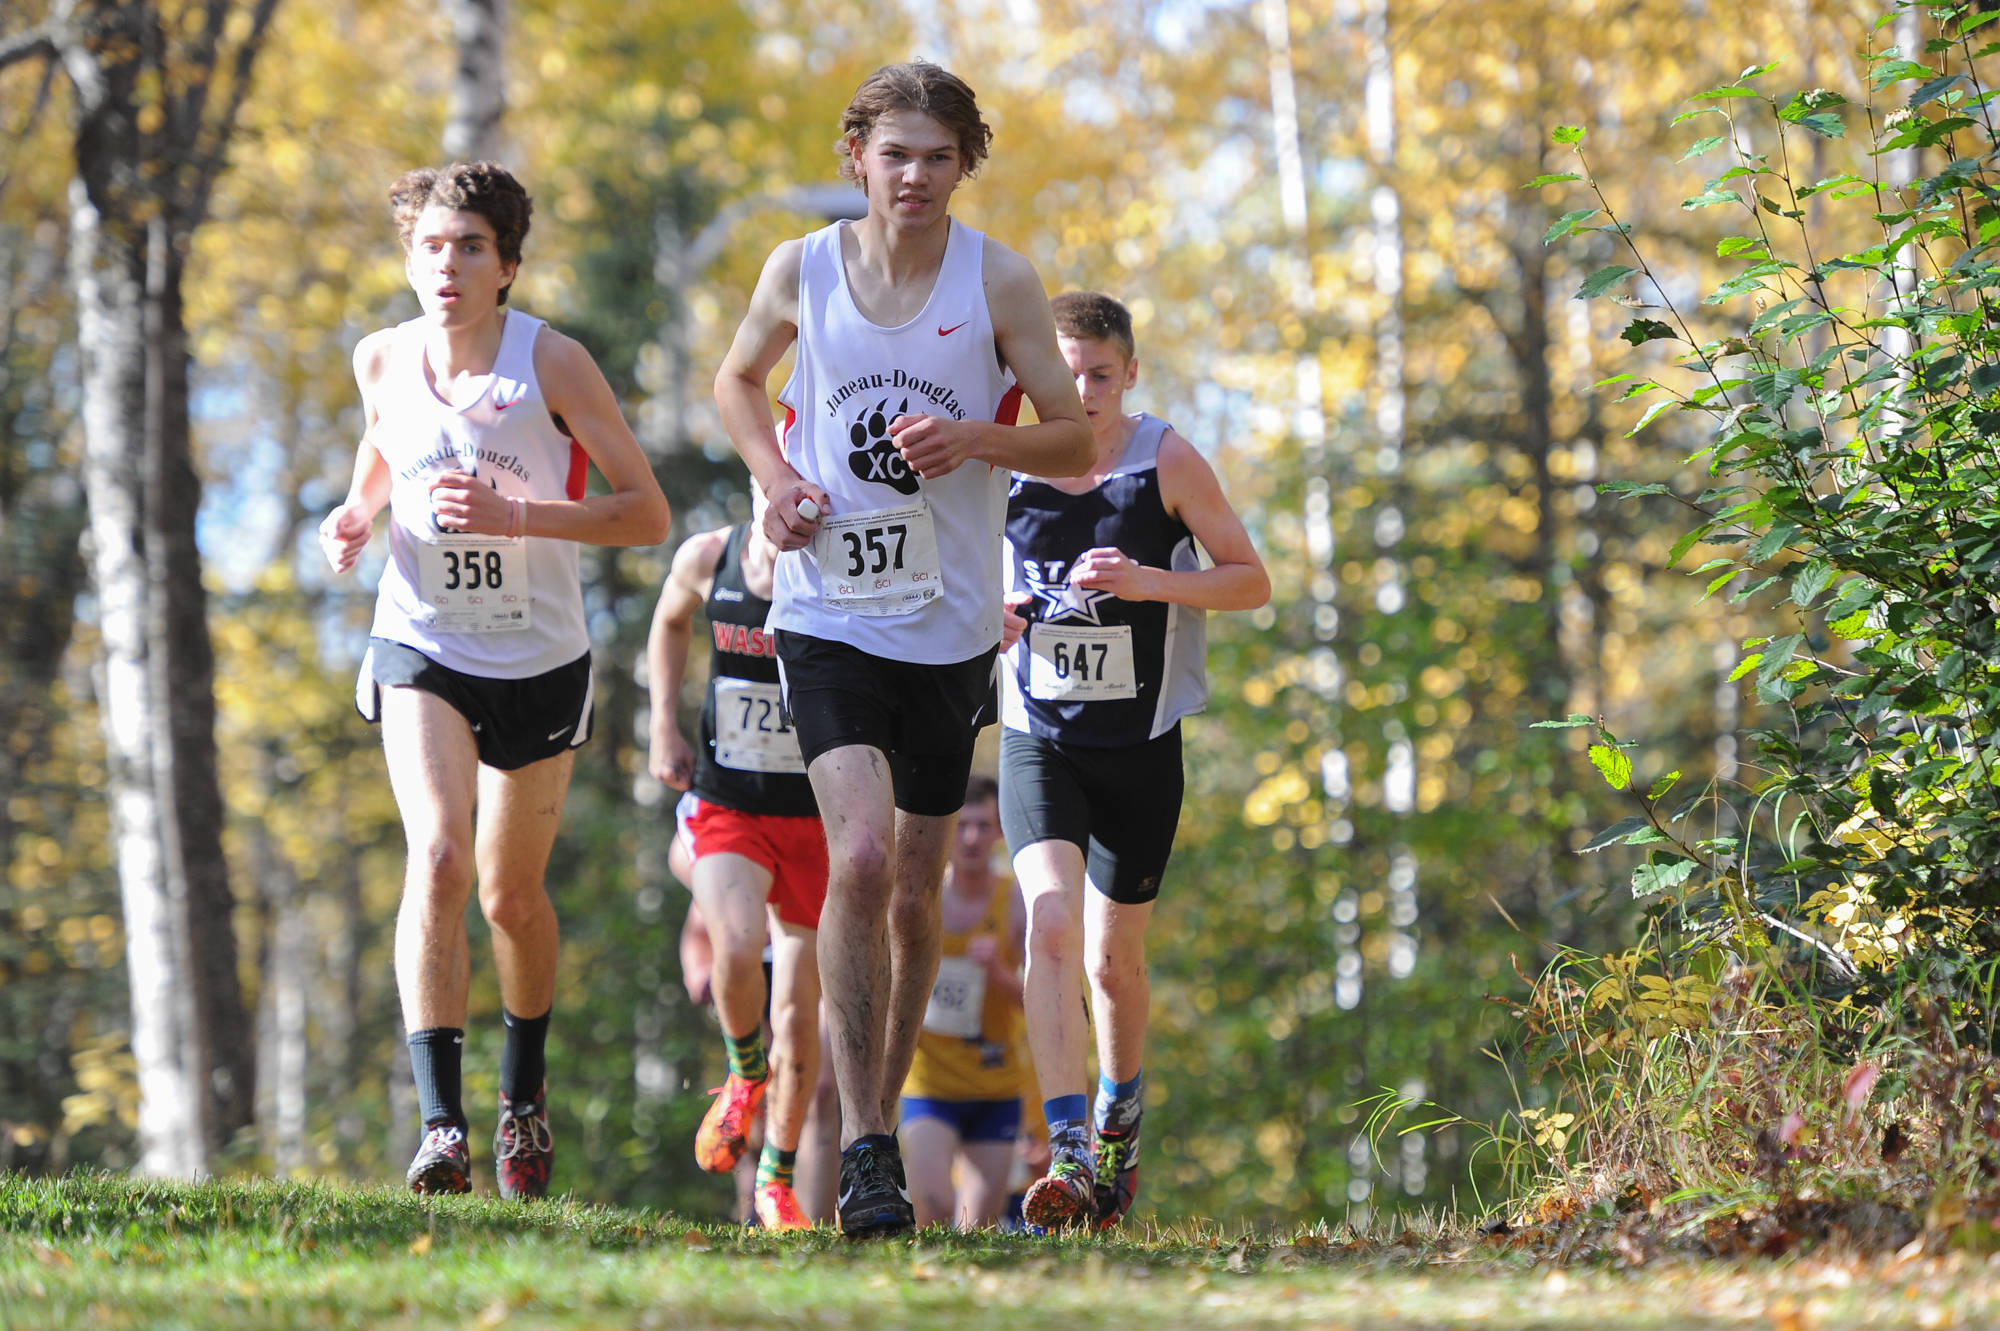 Dalton Hoy, right, and Ronan Davies, left, on the course. (Michael Dineen | For the Juneau Empire)